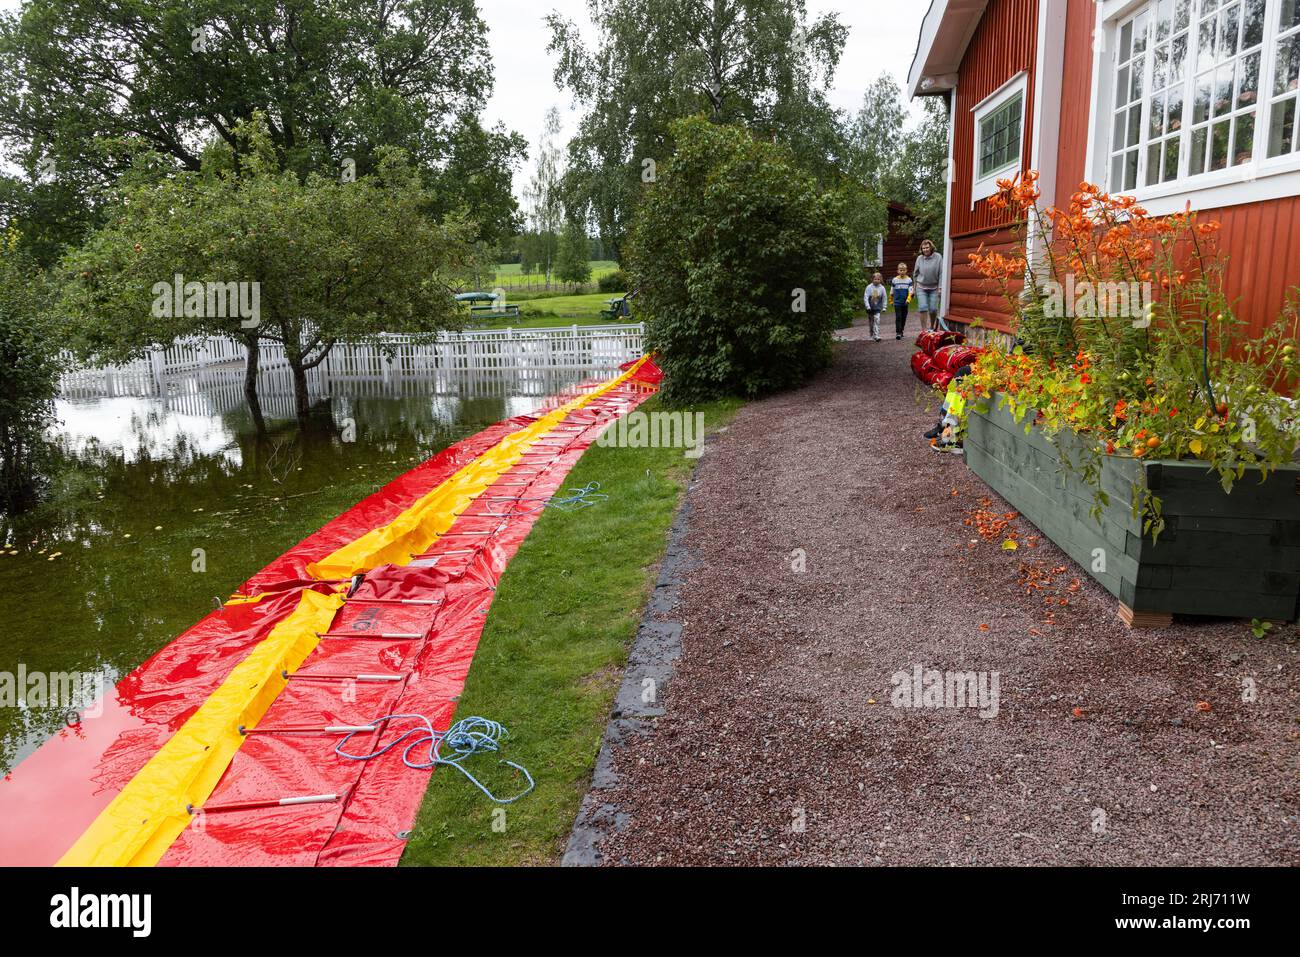 The Carl Larsson house in Sundborn, Dalarna County, Sweden. Sundborn is a locality situated in Falun Municipality, Dalarna County. The most famous resident was the painter Carl Larsson and his house (Little Hyttnäs) in Sundborn is a popular tourist attraction. In the picture: Flooded Sundborn river just outside The Carl Larsson house. Here a water protection equipment from QWW company. Stock Photo